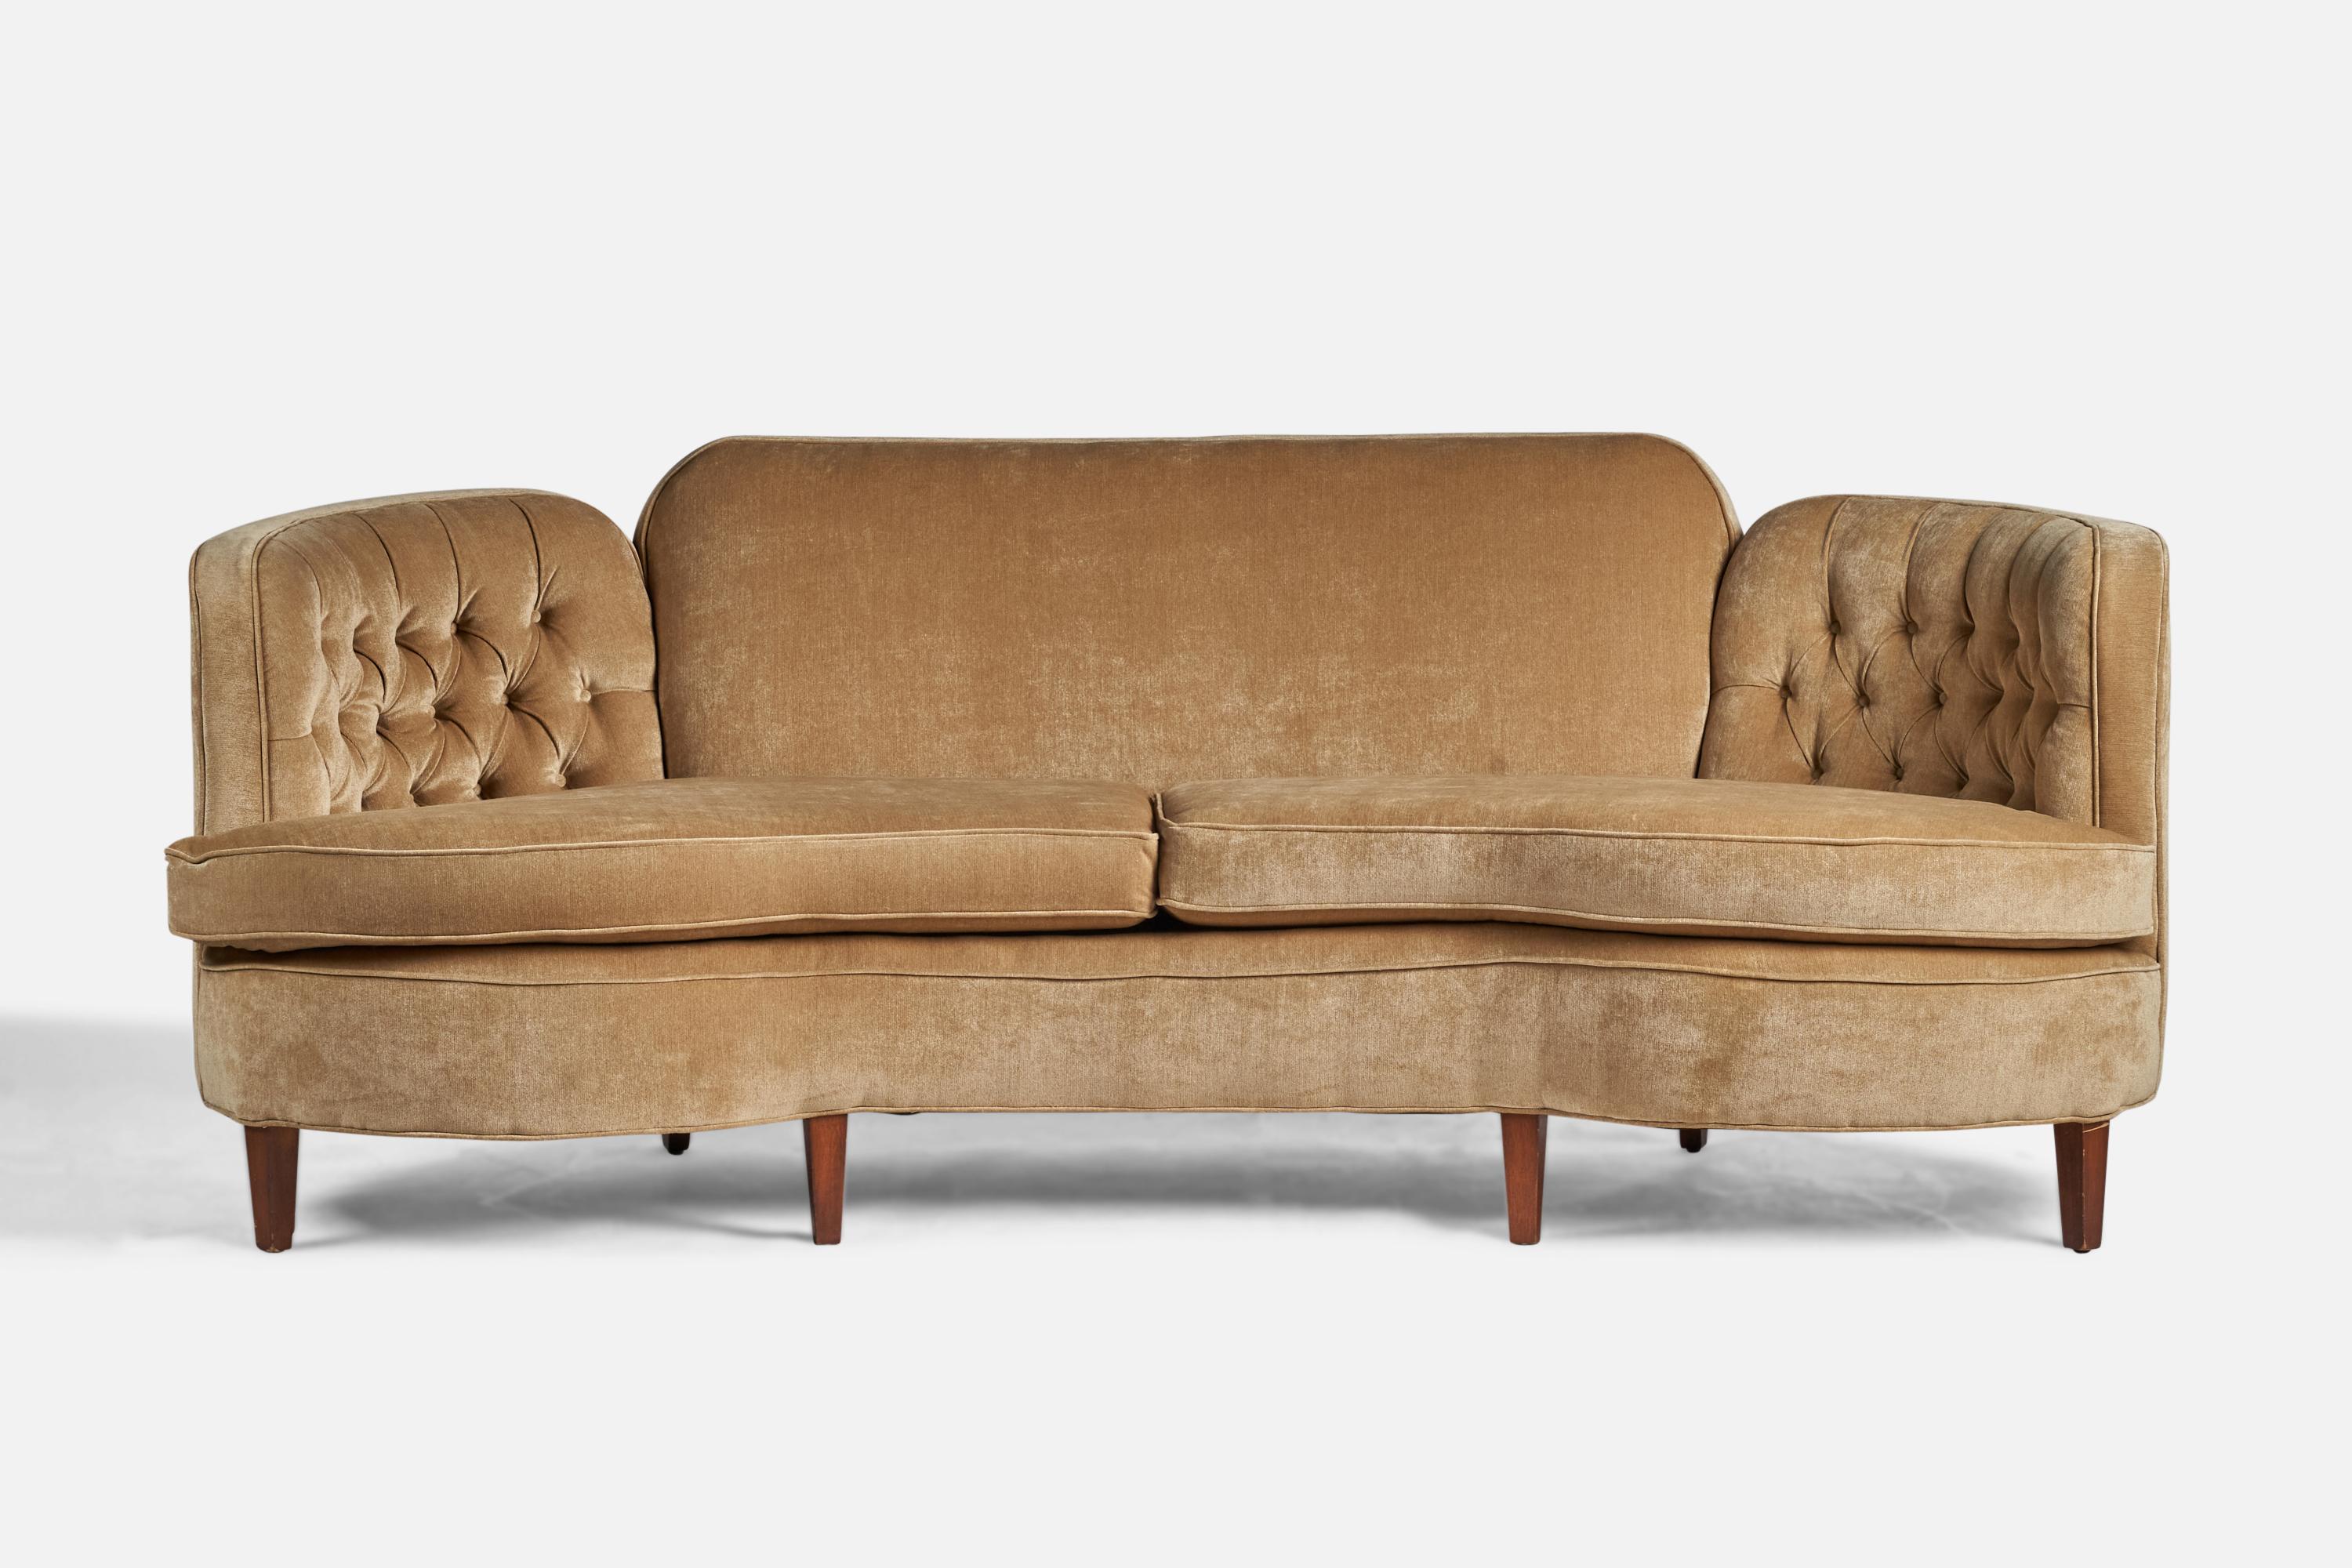 A wood and beige fabric sofa attributed to Edward Wormley for Dunbar, USA, 1950s.

18” seat height